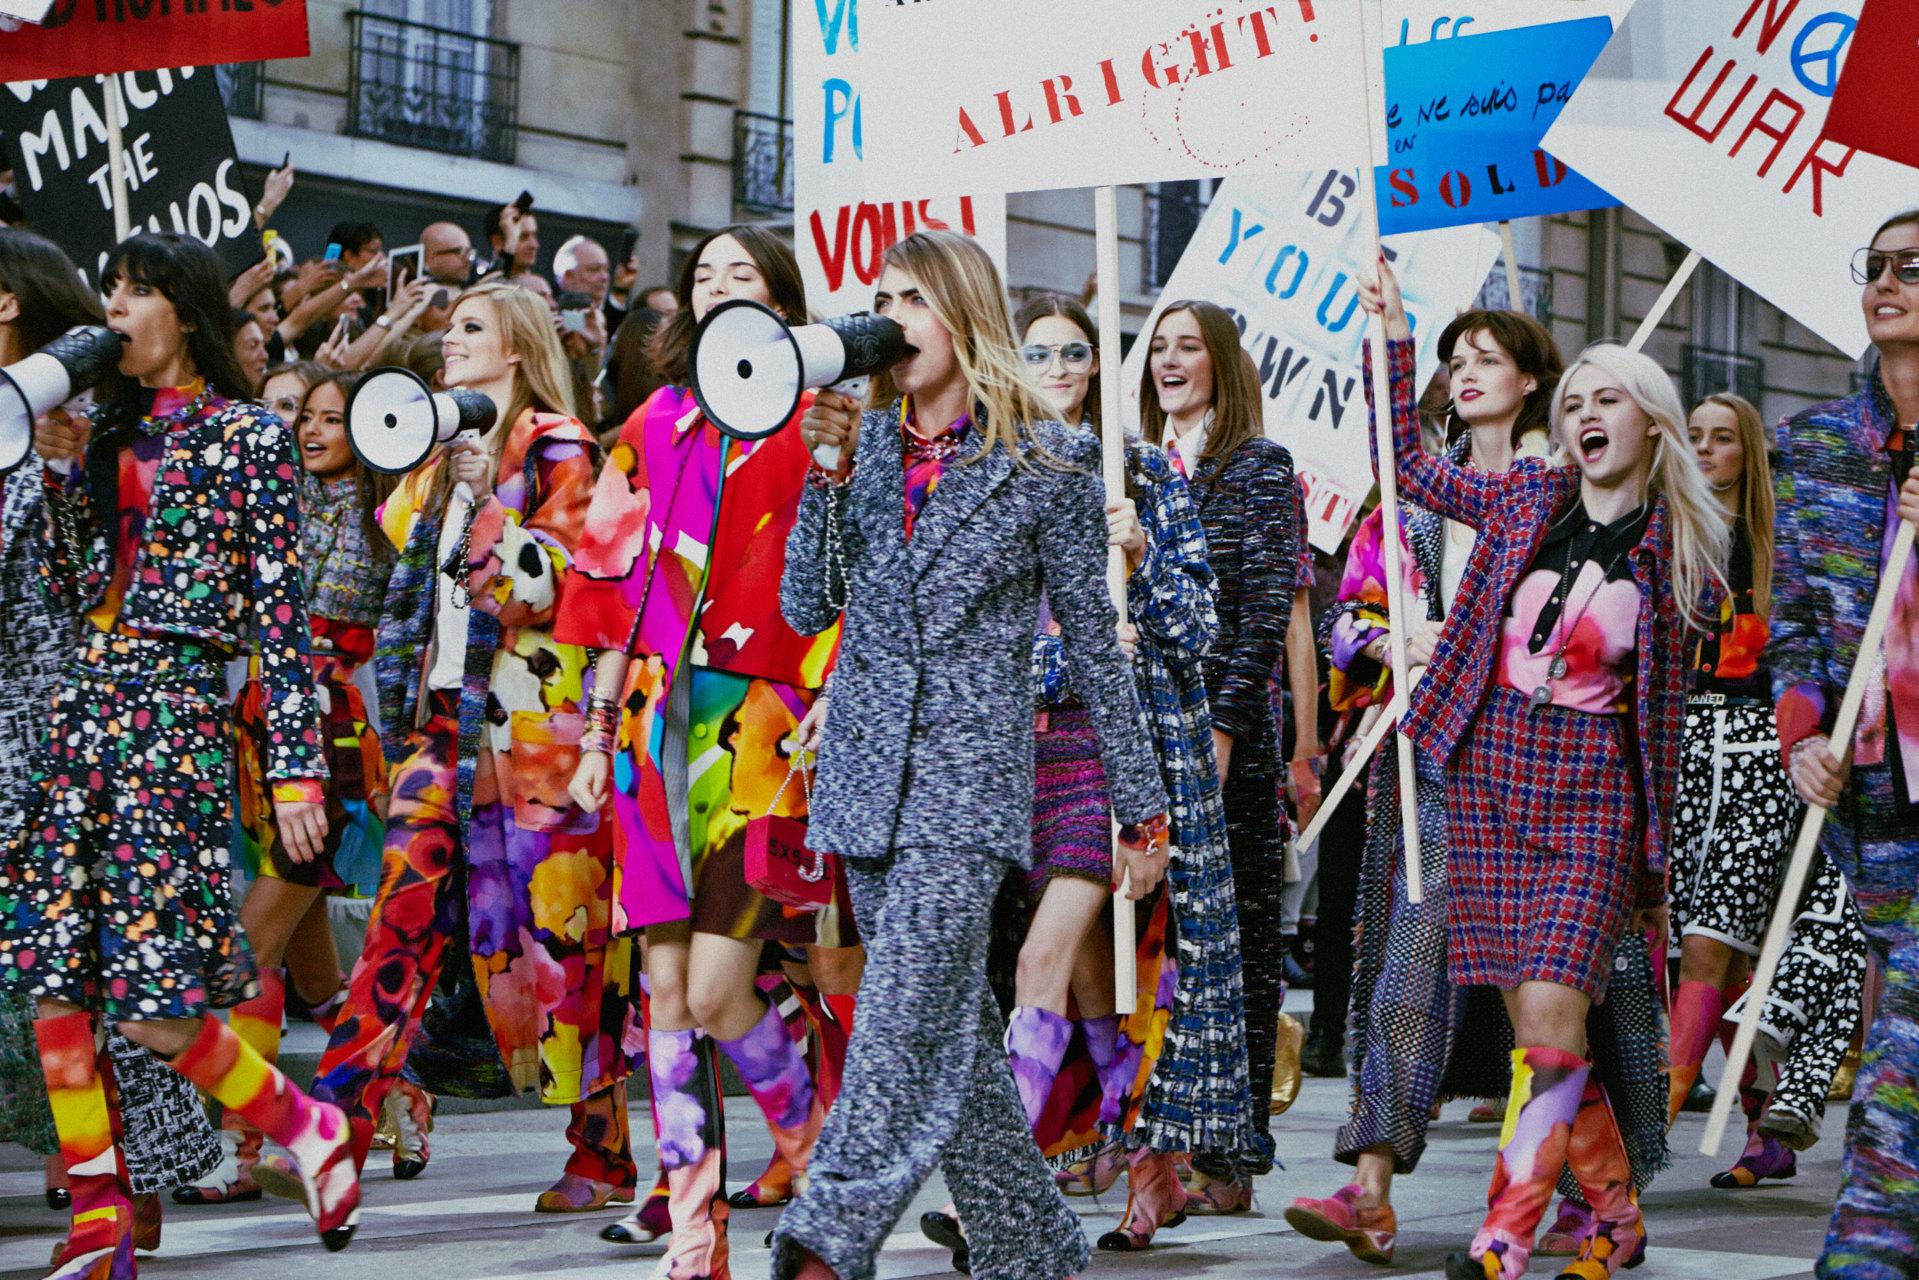 Cara Delevingne leads models down “Boulevard Chanel” for Chanel's  “feminism-inspired” Spring 2015 PFW runway.